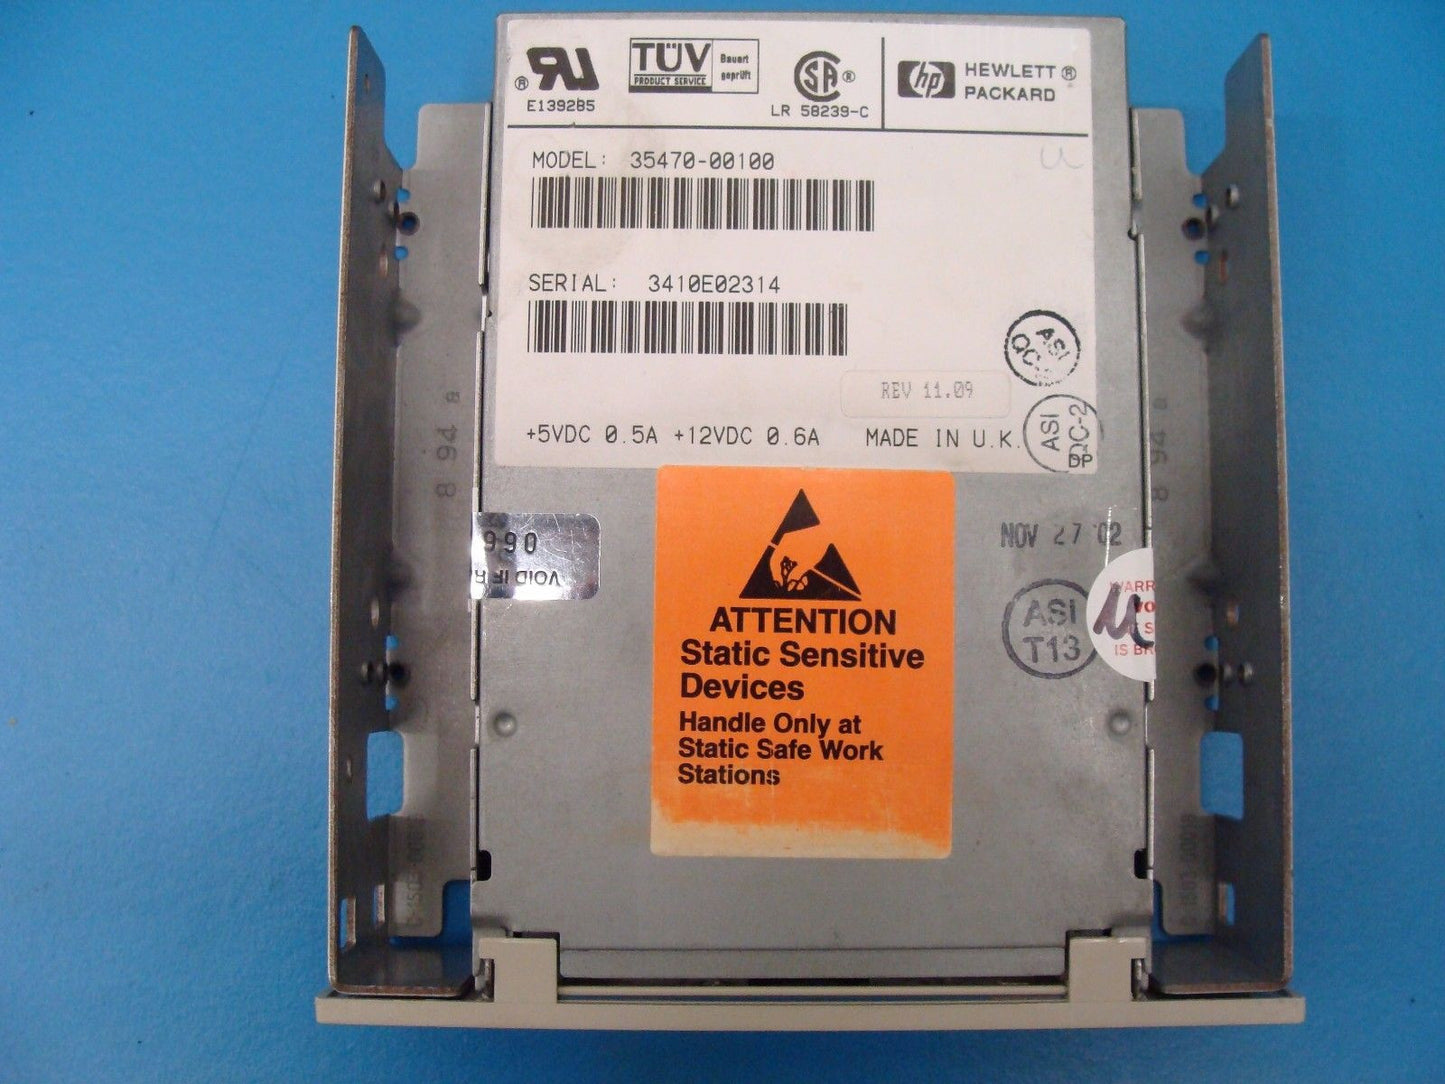 HP 35470 2/4GB 4MM DDS-1 SCSI 5.25" Tape Drive C1503a 35470-00100 - Micro Technologies (yourdrives.com)